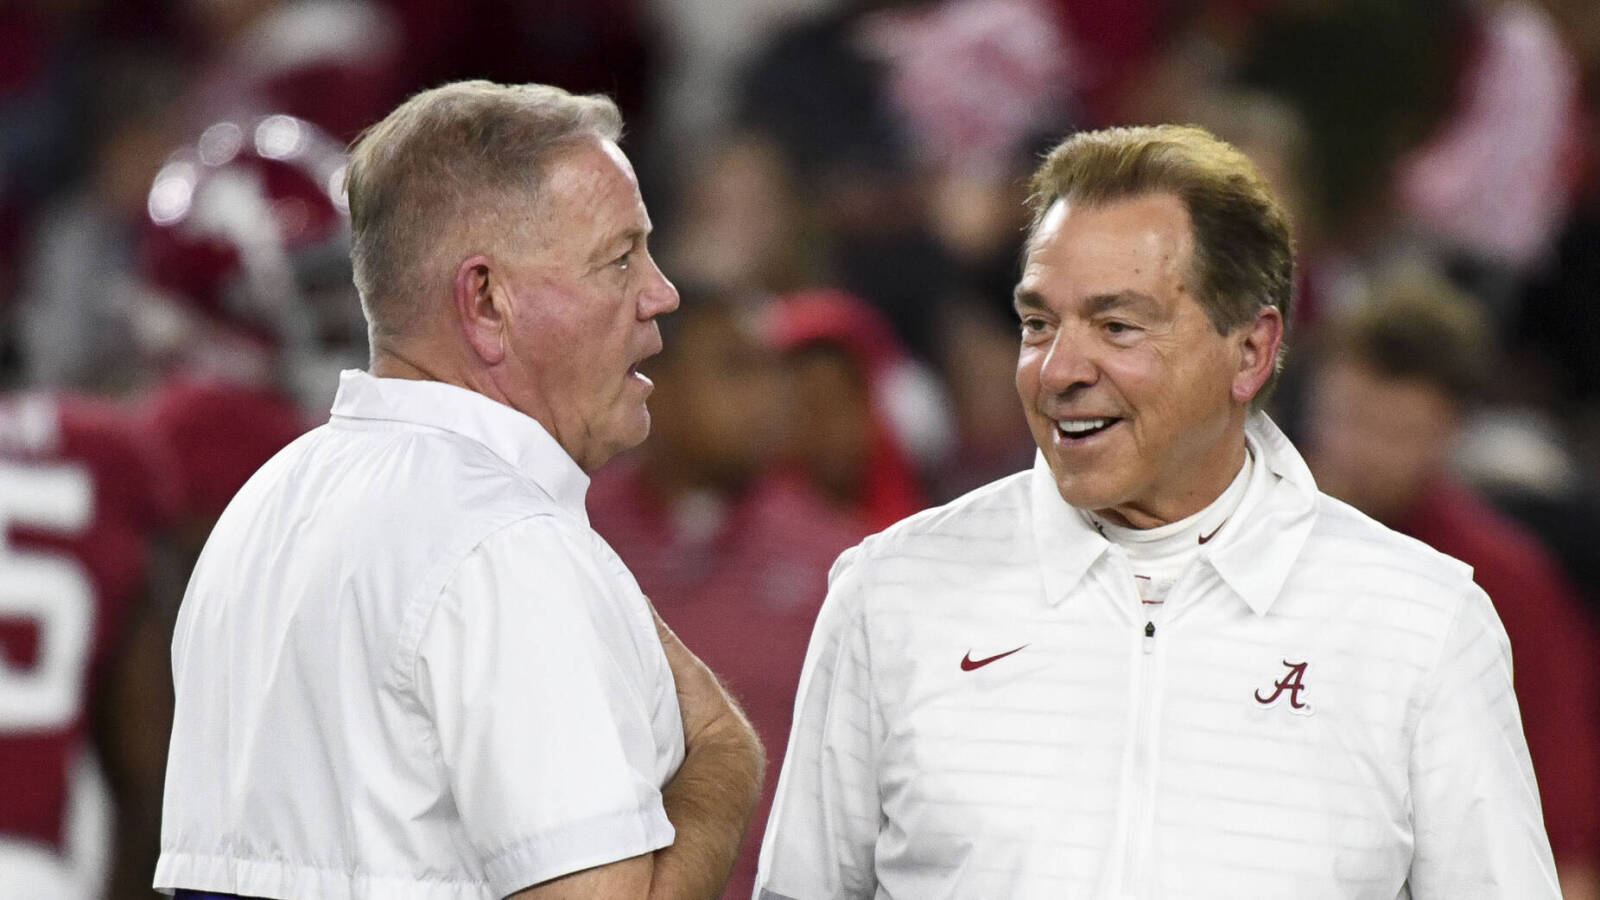 Nick Saban gives his stamp of approval for Brian Kelly and LSU